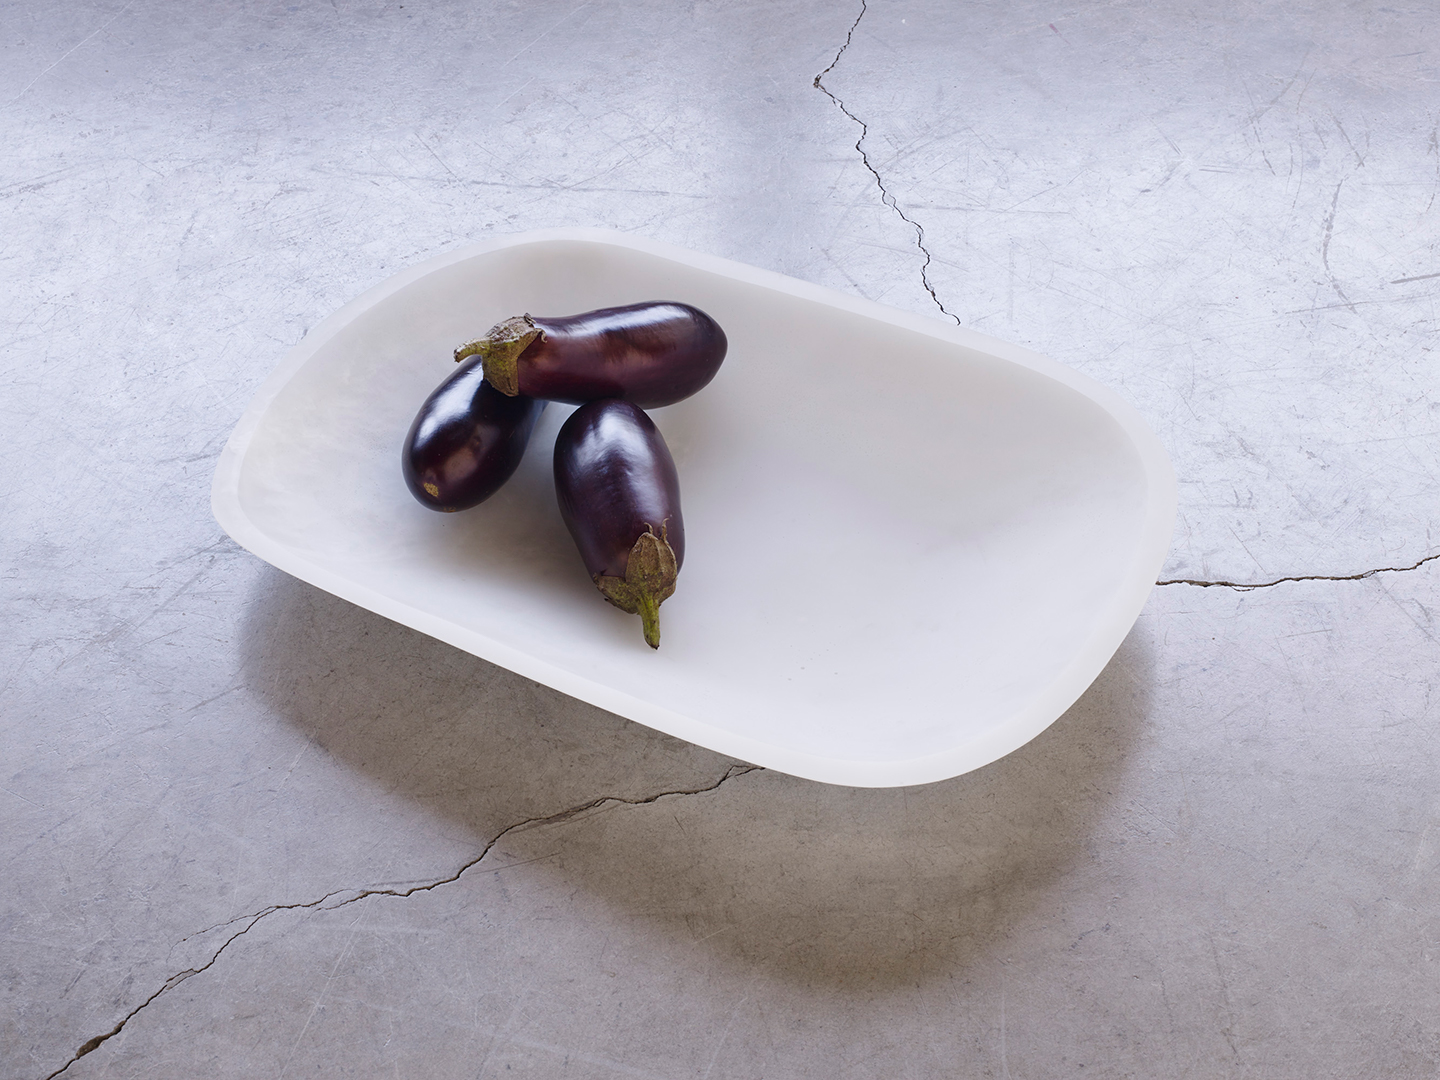 A stunning unique platter that has both depth and texture, the Keats Tray is a classic, adding refined charm to any decor. Available for purchase at Studio Sturdy and created by Martha Sturdy